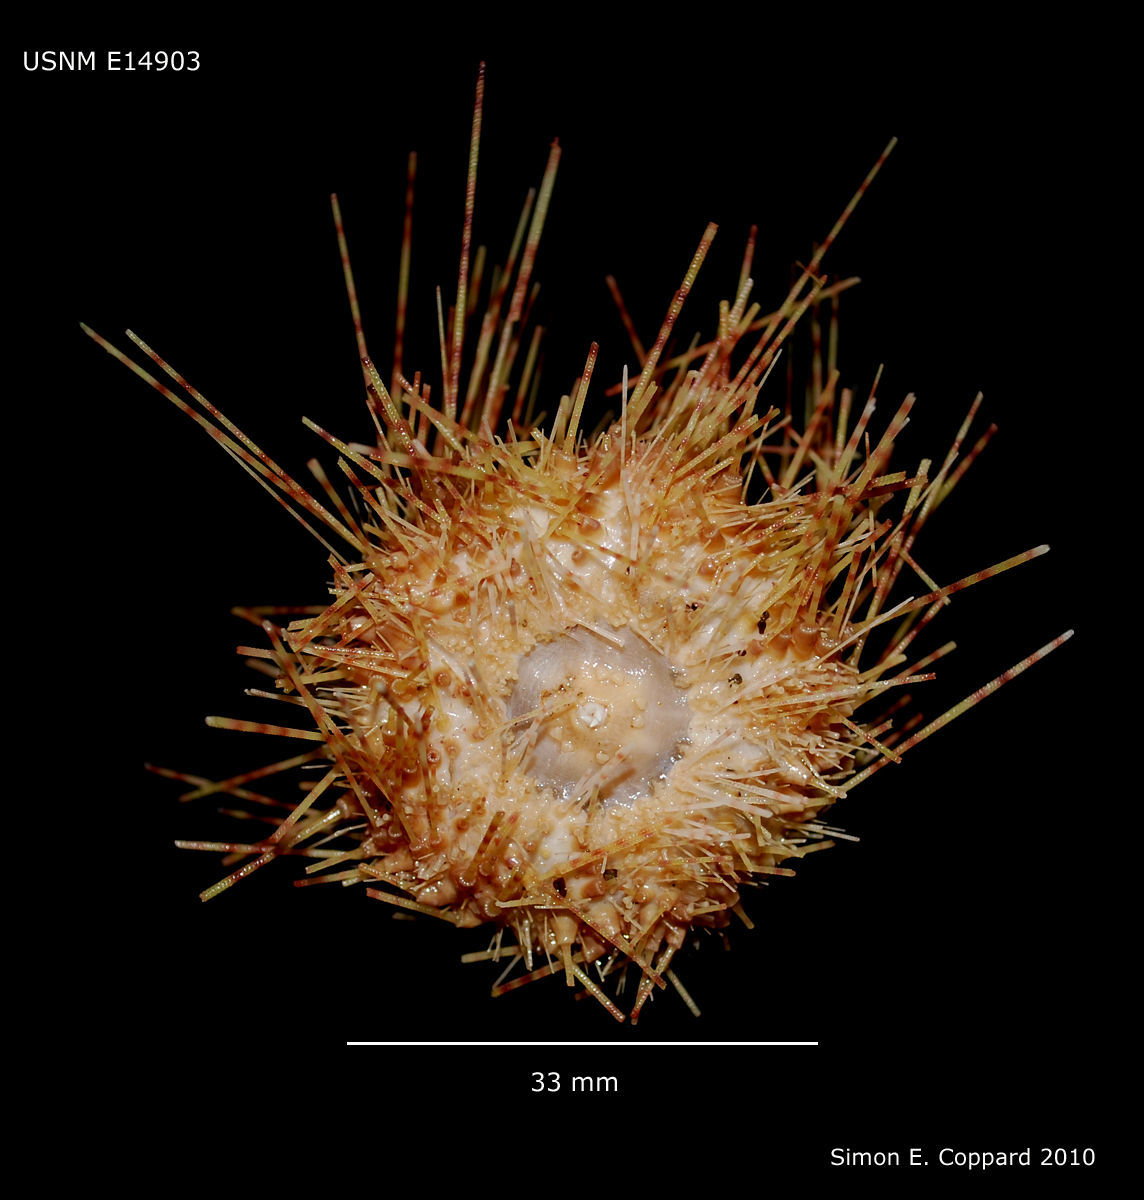 Image of Pale spine fire urchin